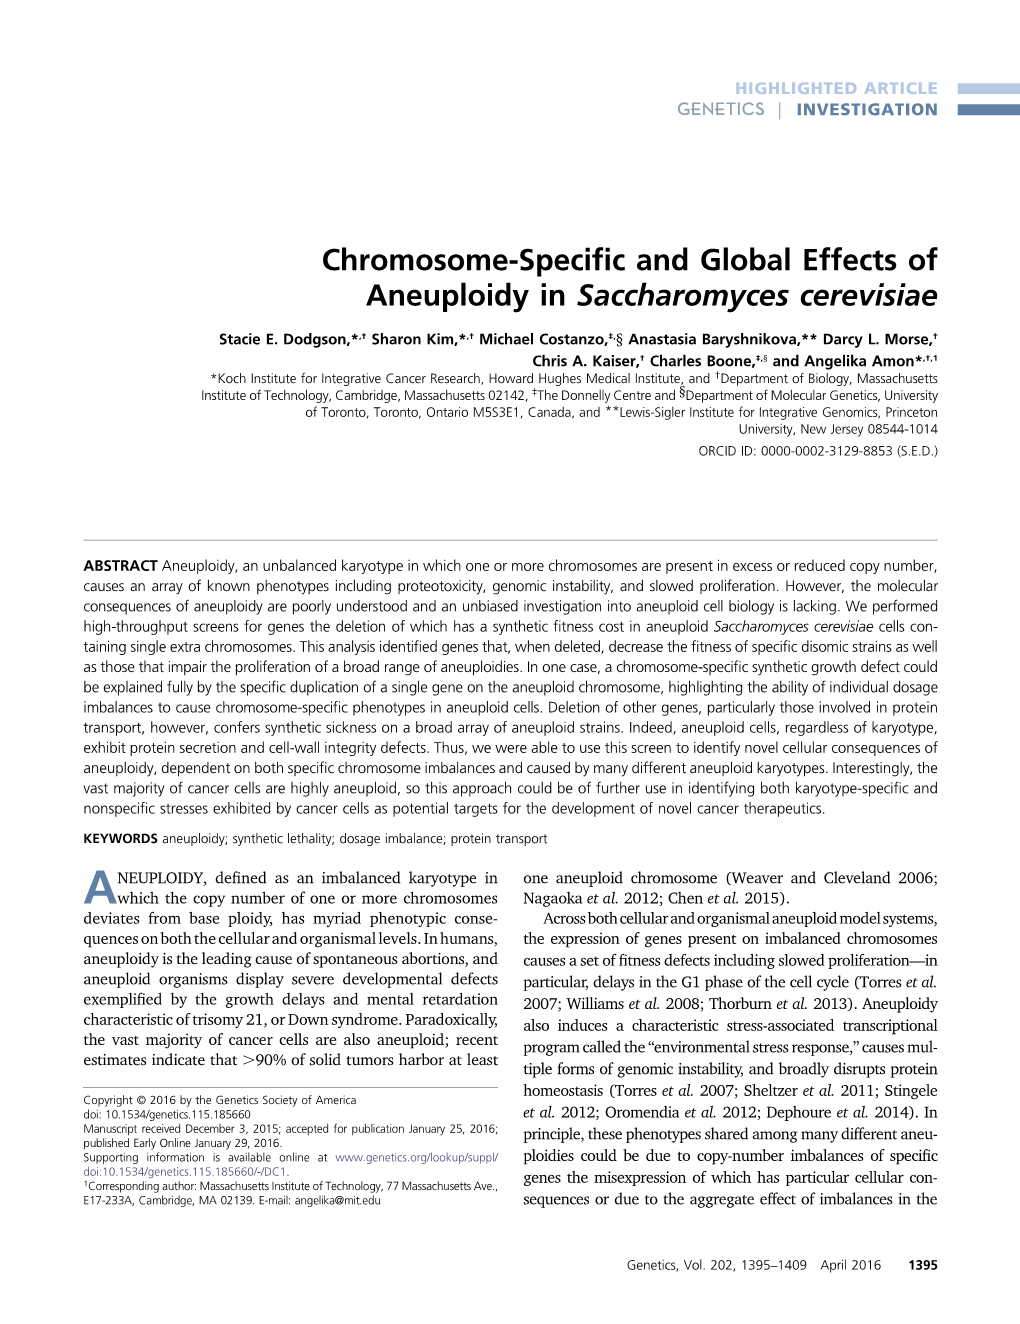 Chromosome-Specific and Global Effects of Aneuploidy In